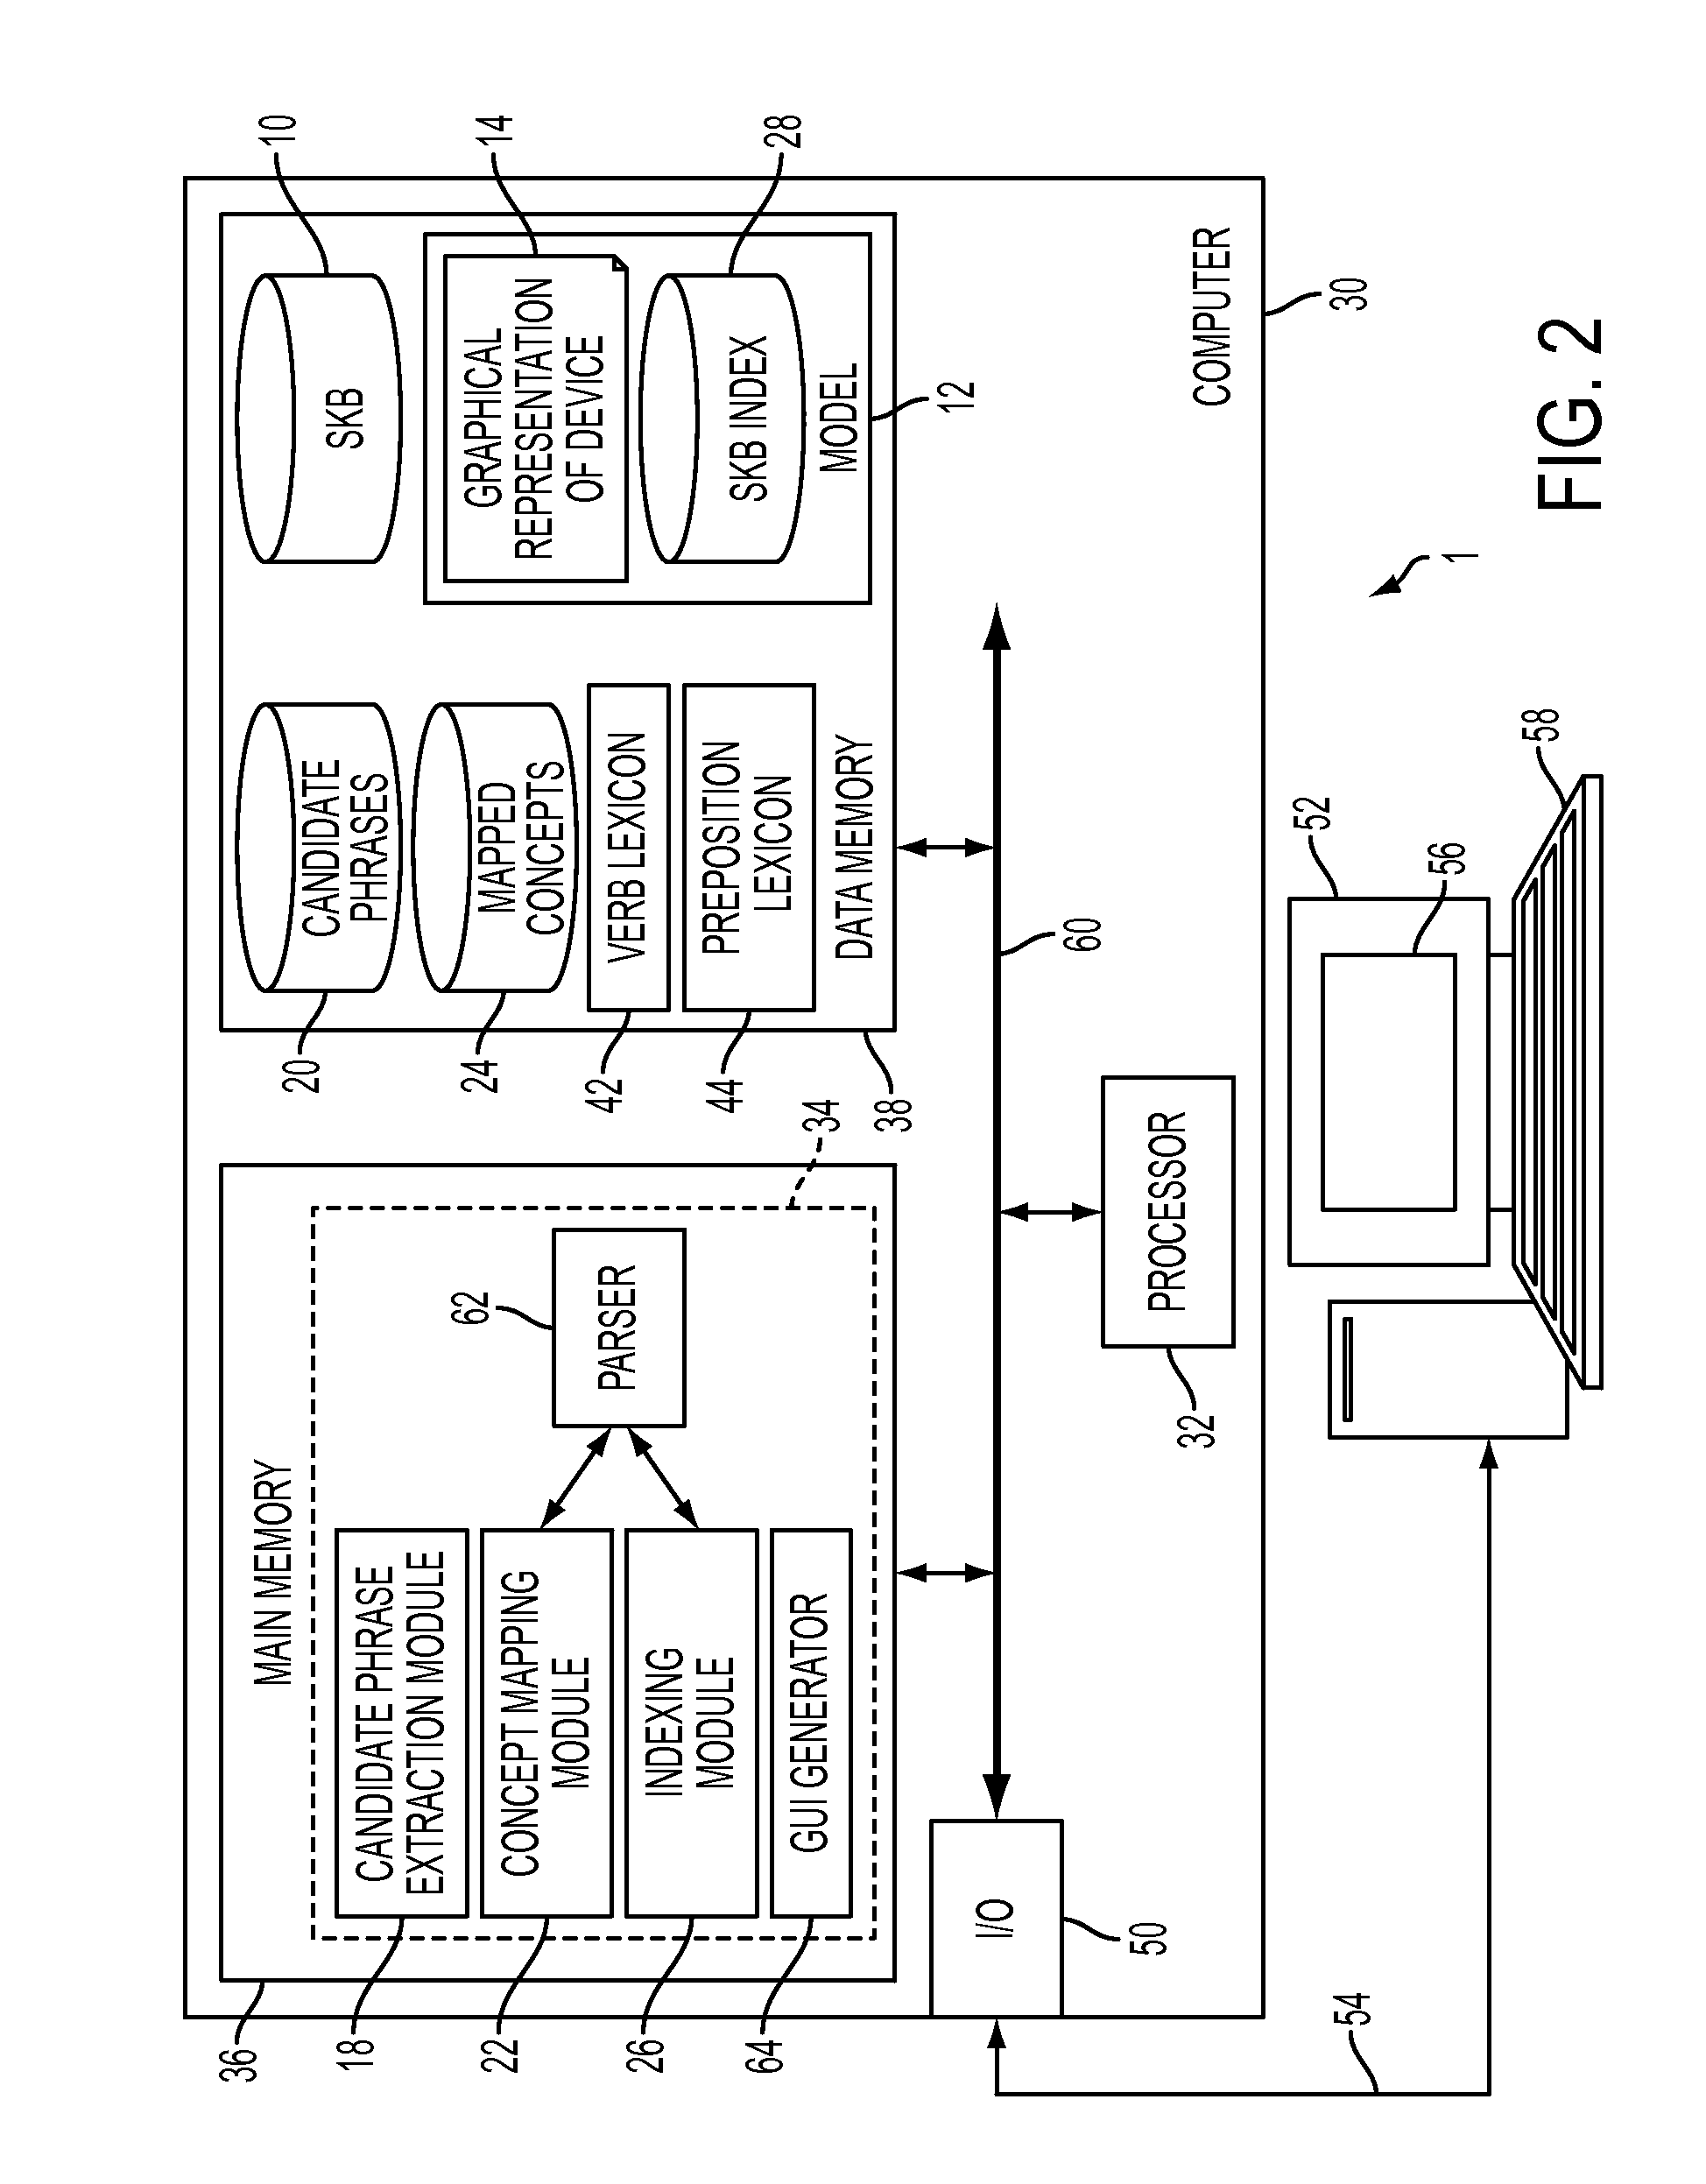 Method and system for linking textual concepts and physical concepts